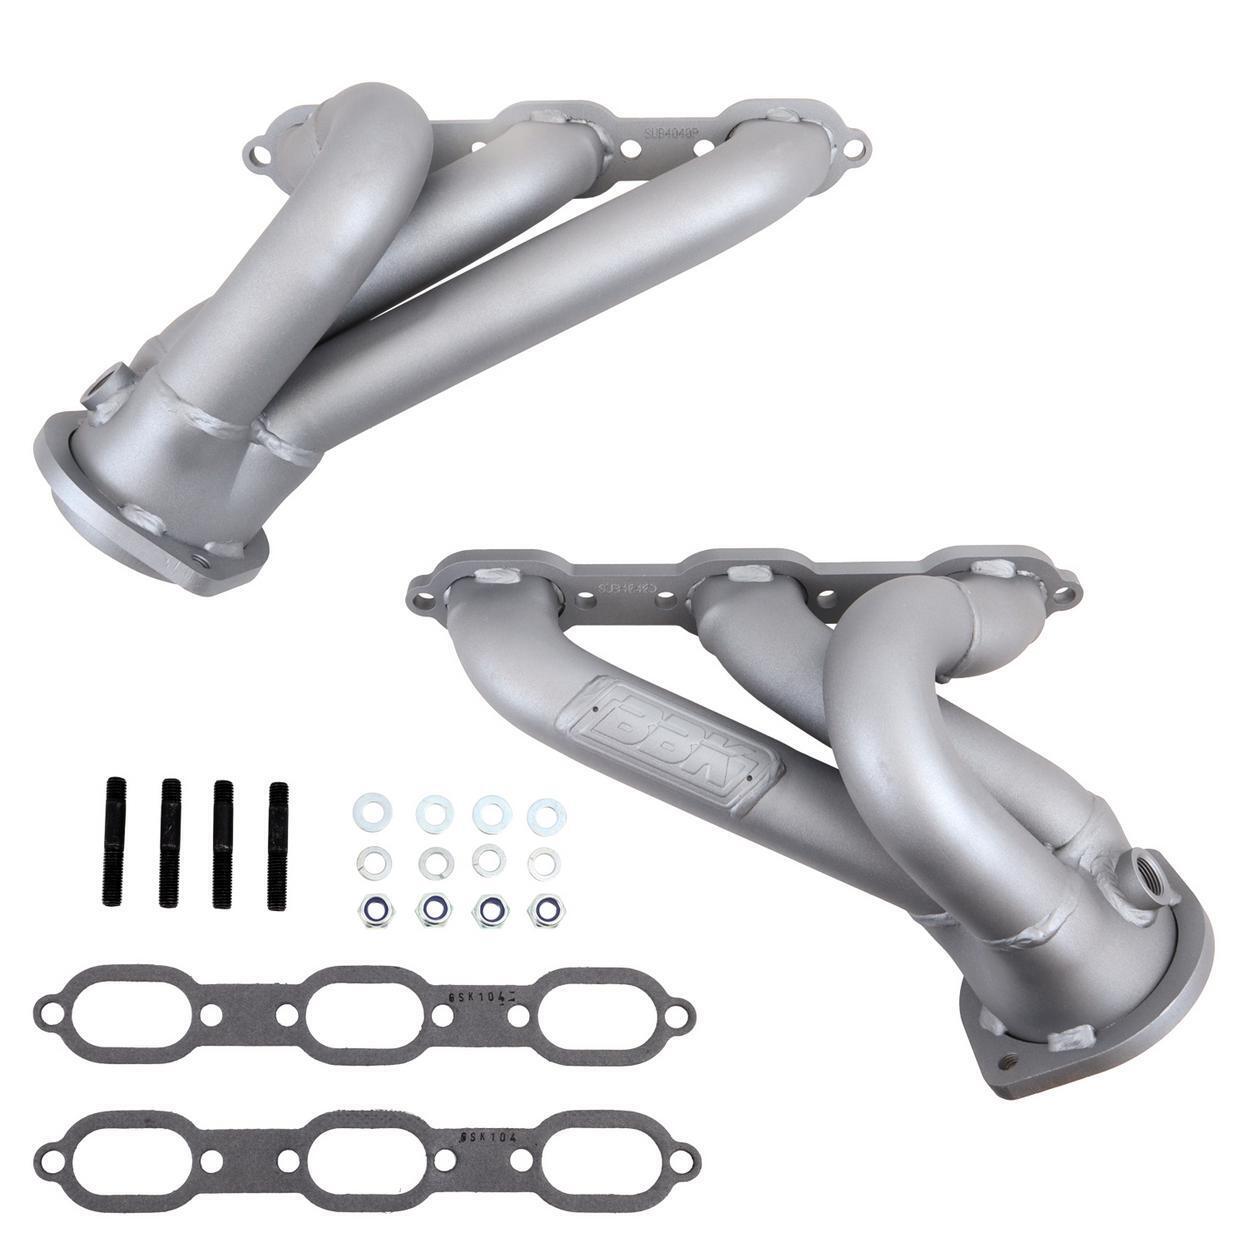 BBK Performance 4040 2006-10 CHARGER CHALLENGER 300 3.5L 1 3/4 SHORTY HEADERS (T